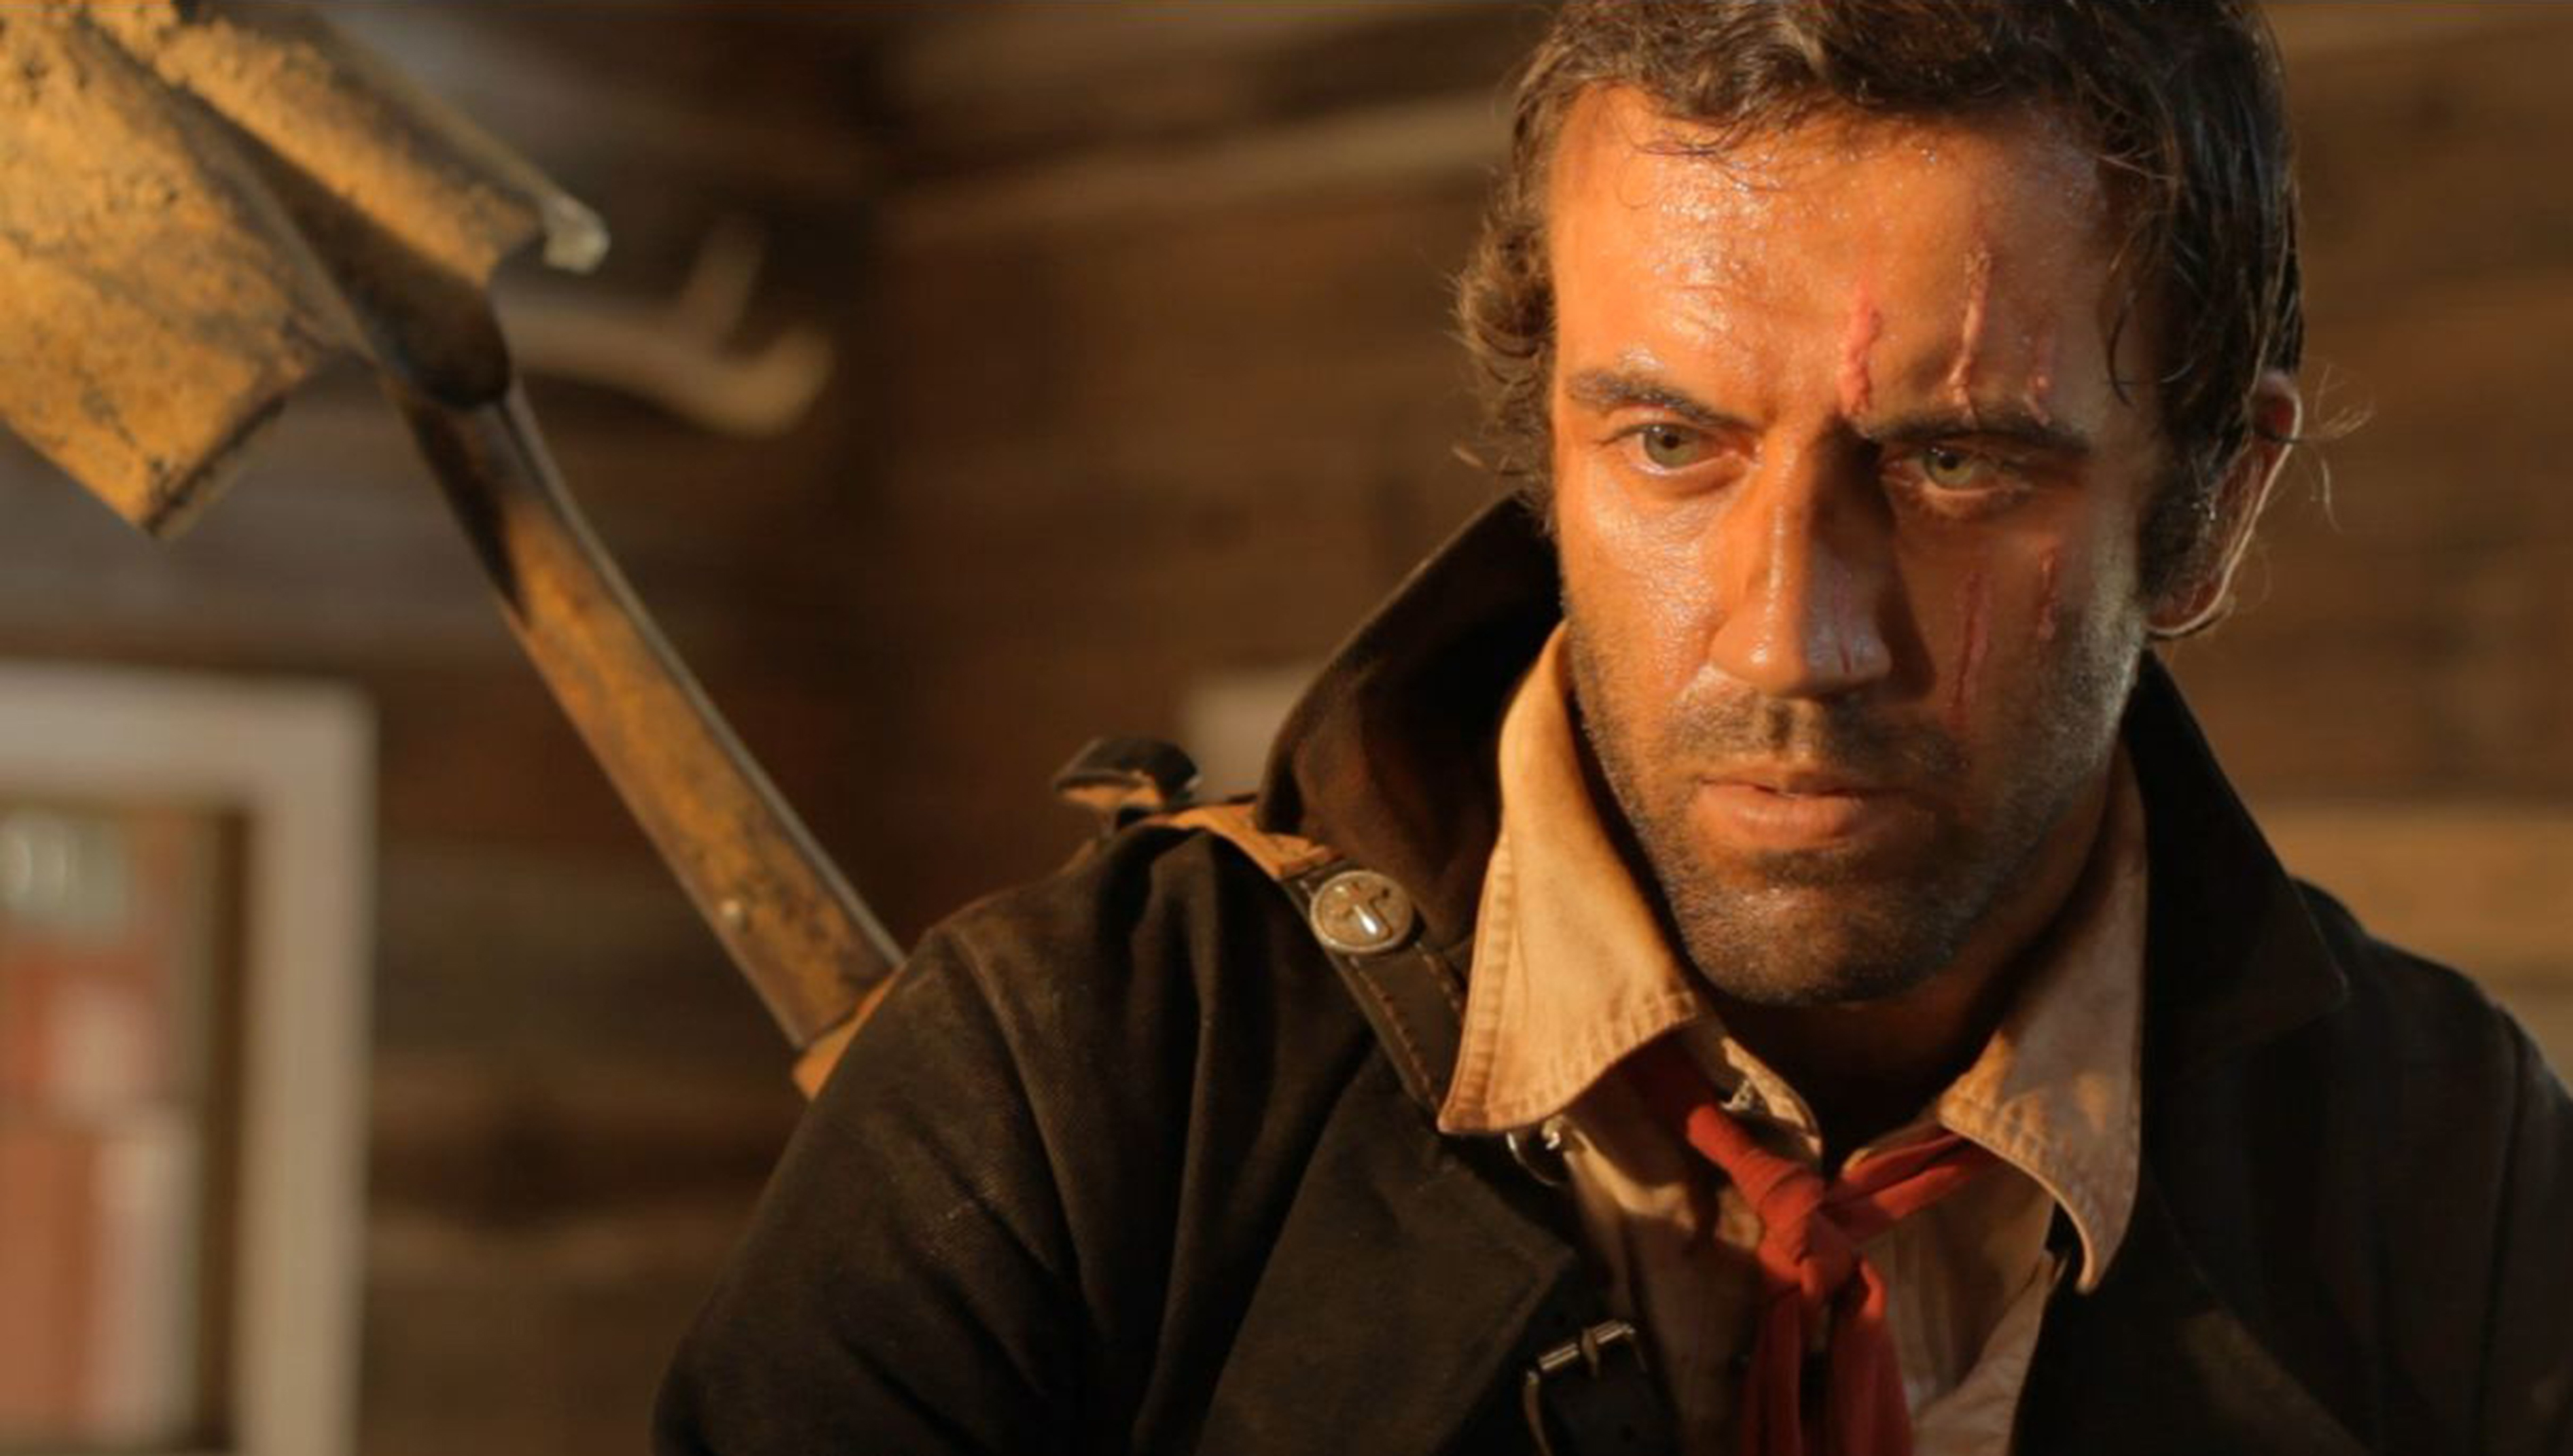 Daniel Van Thomas plays the Preacher in Revelation Trail, from Living End Productions and Entertainment One (2014)